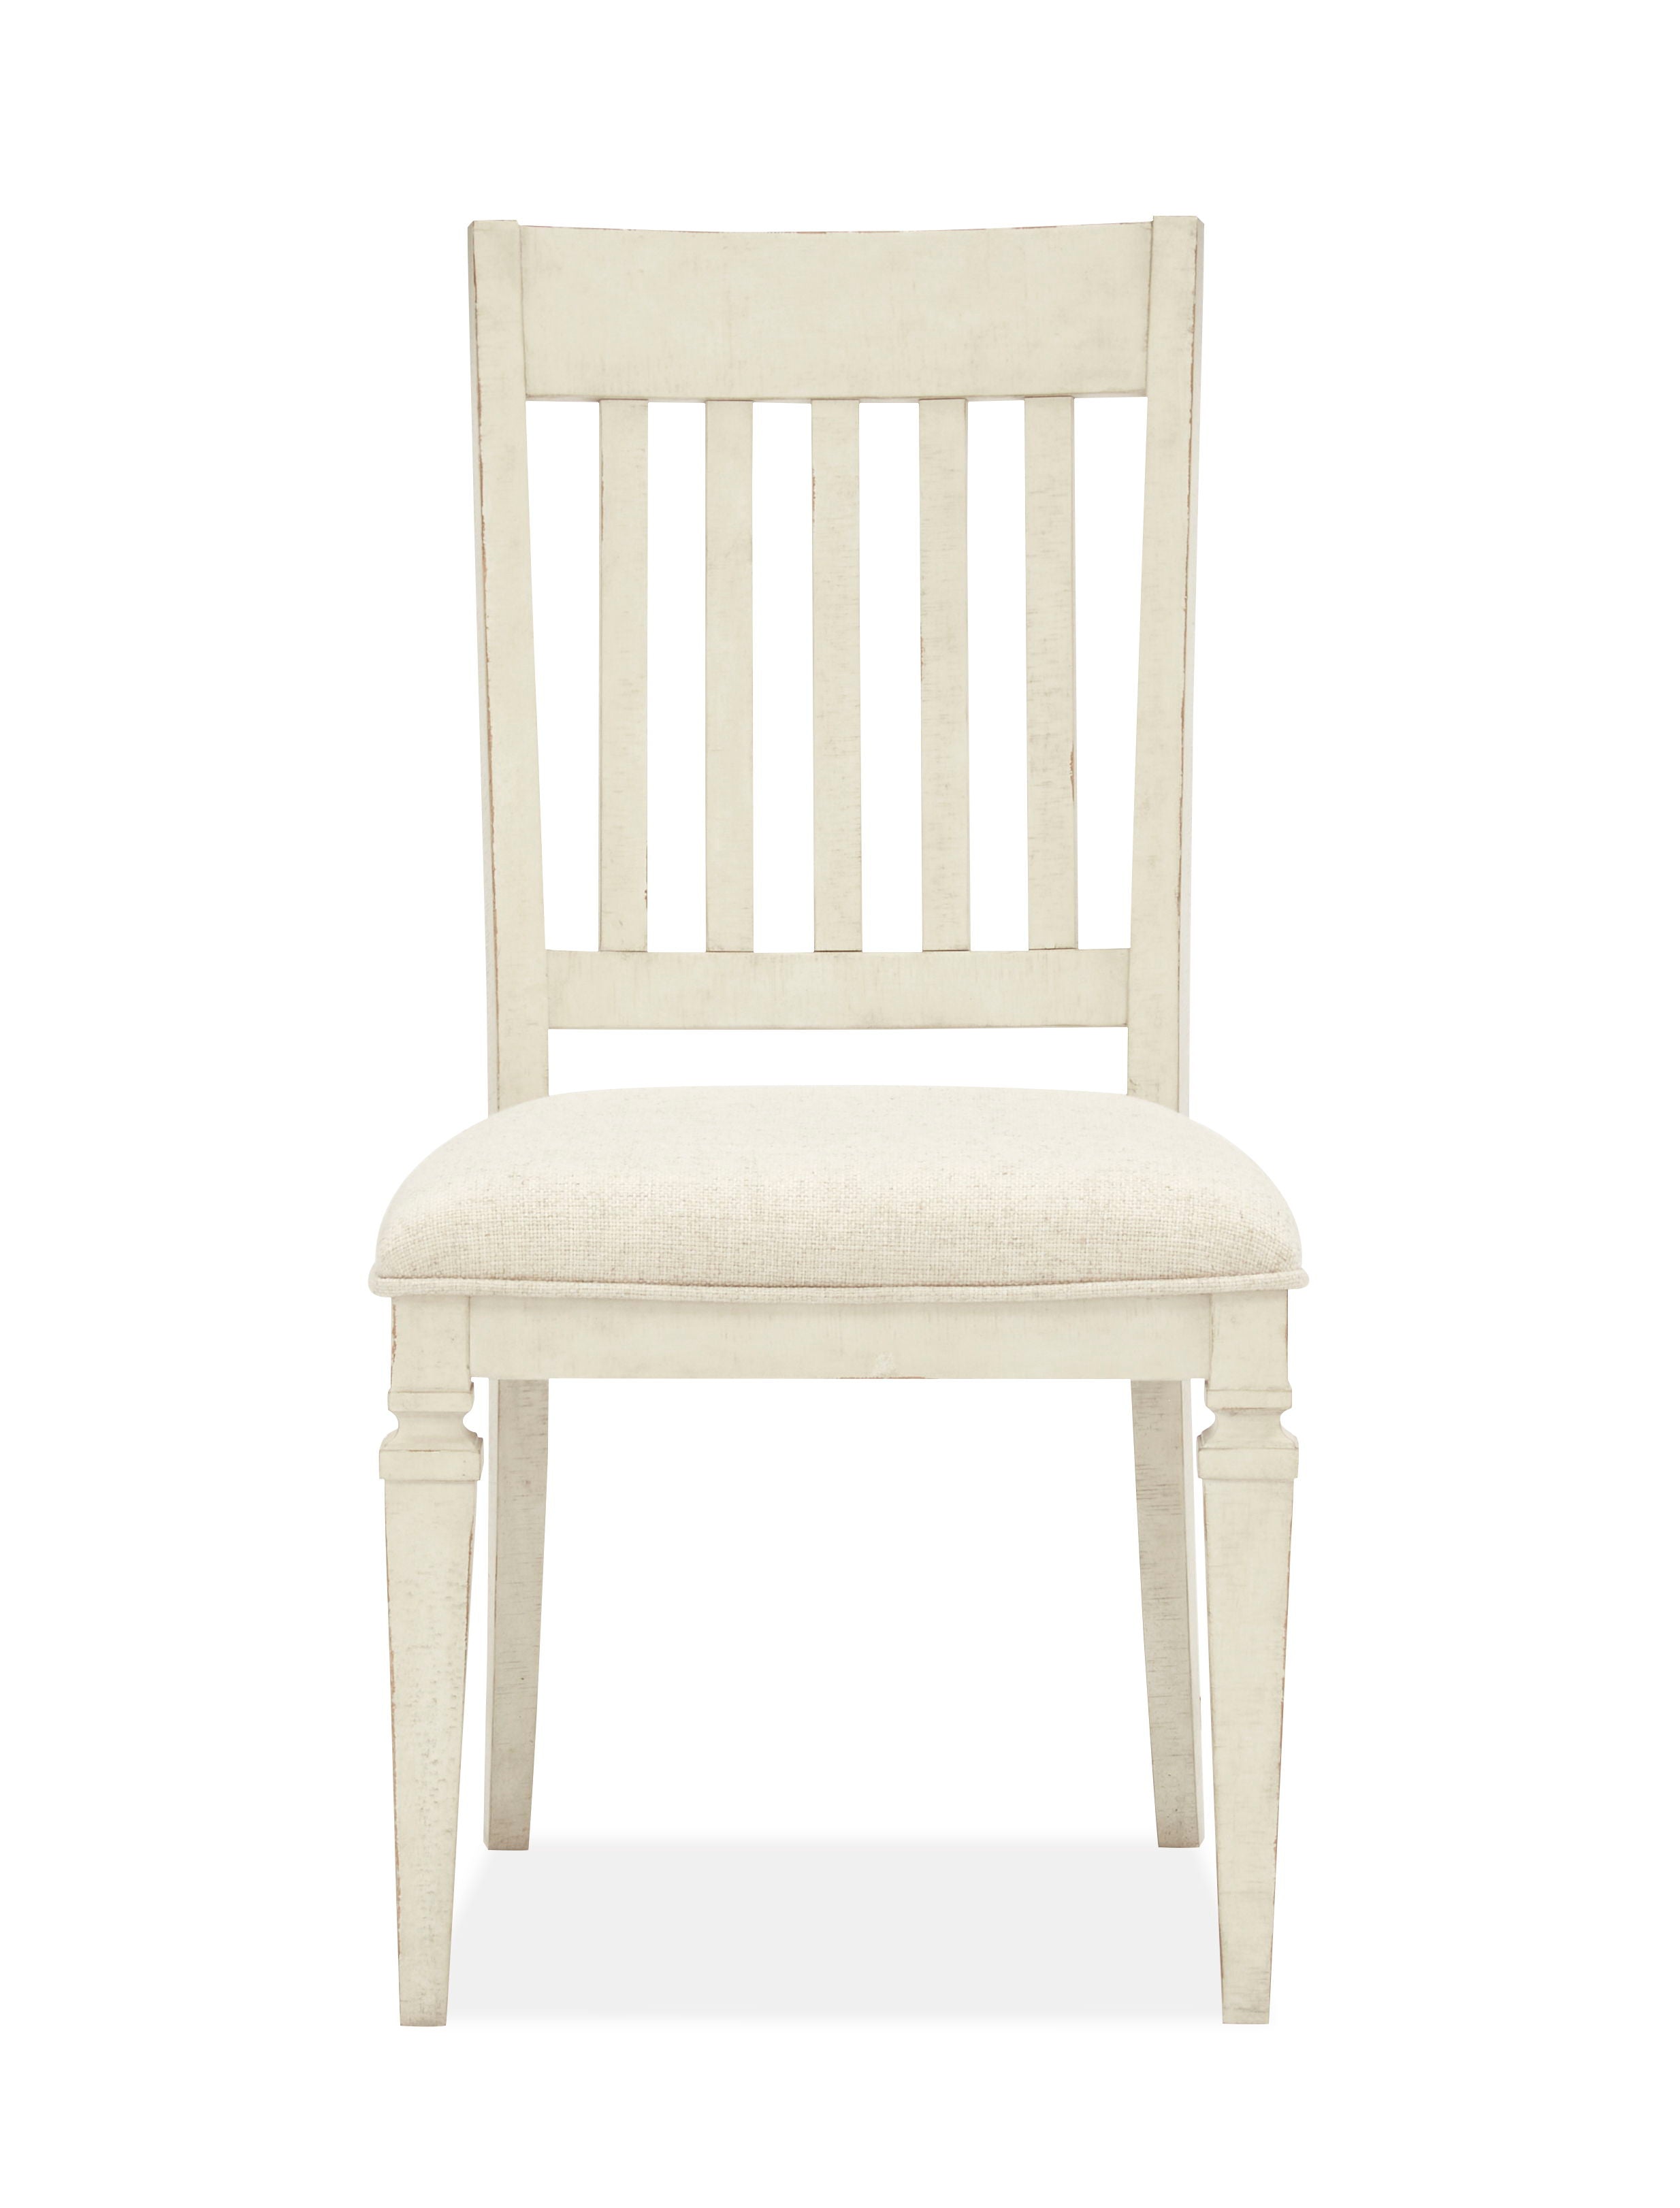 Newport - Dining Side Chair With Upholstered Seat (Set of 2) - Alabaster